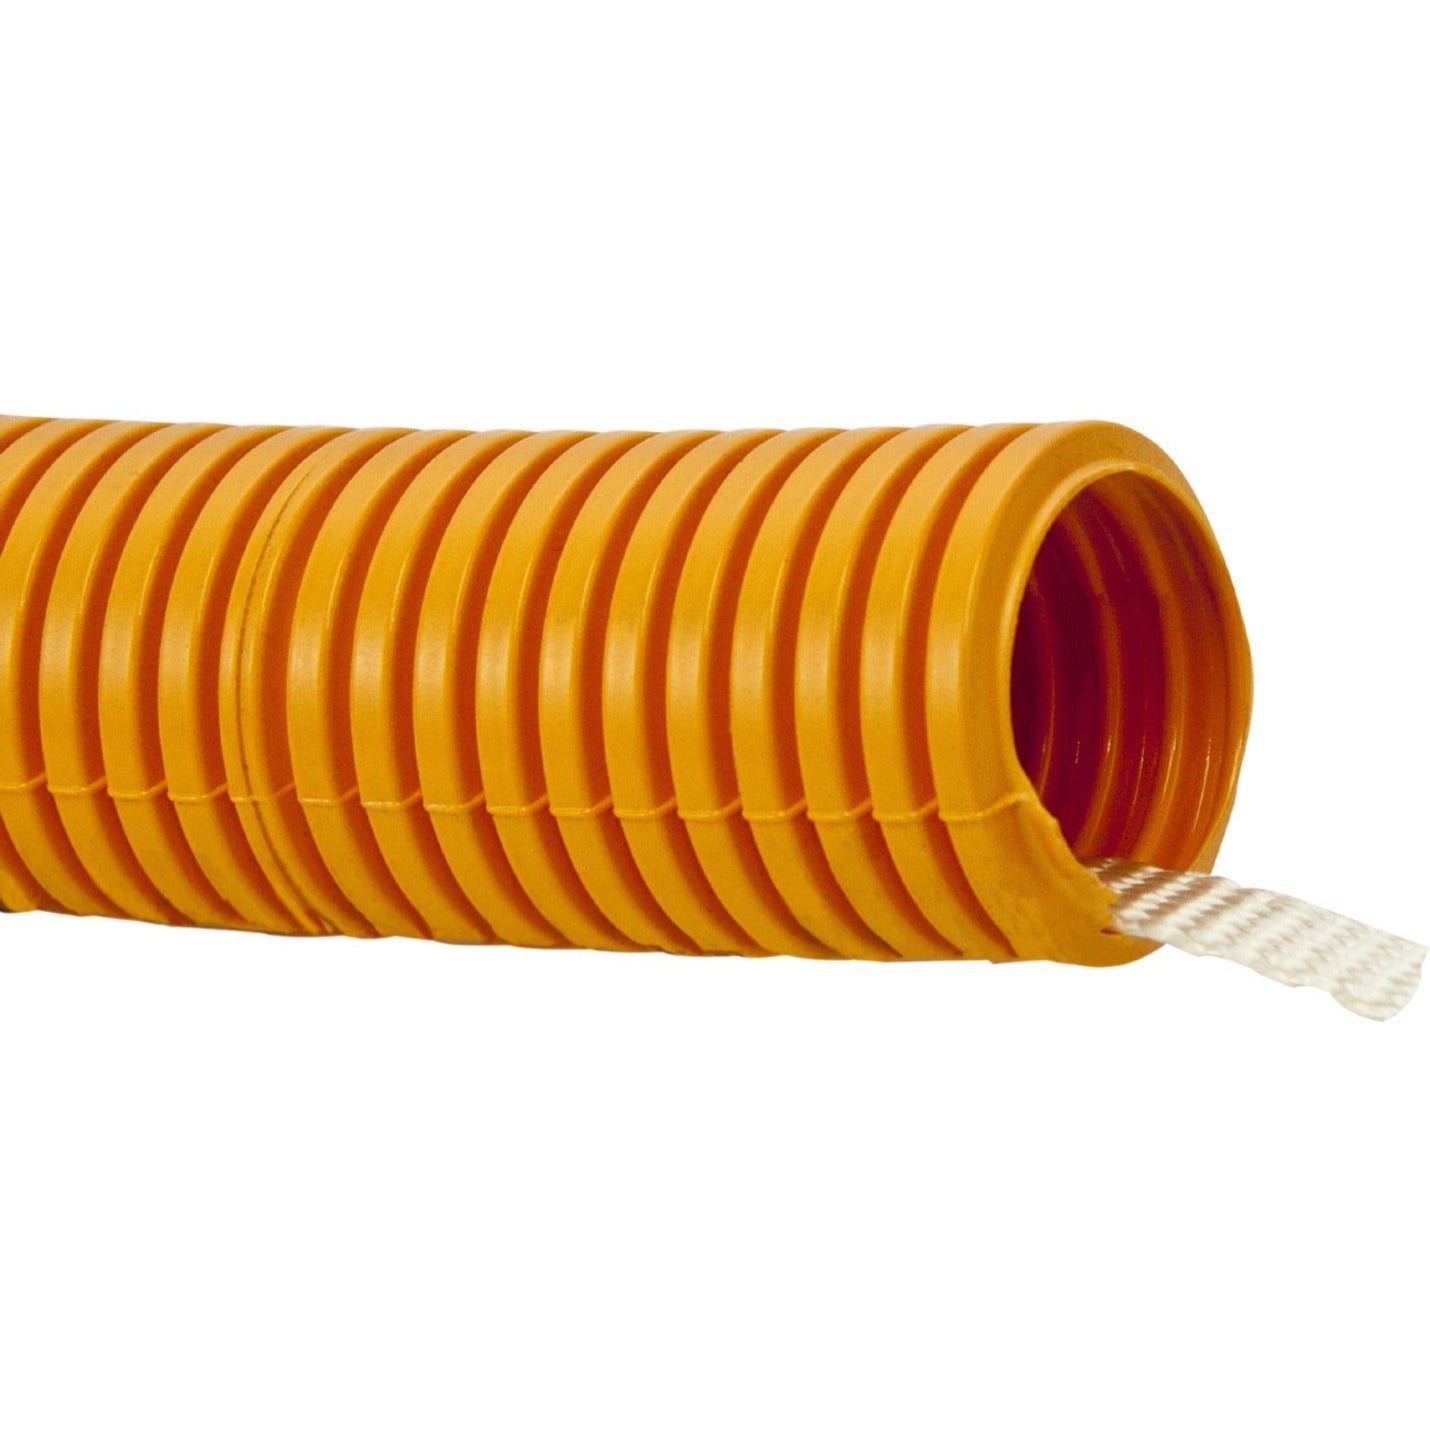 W Box RG20050 UL Listed Corrugated Flexible Conduit w/ Nylon Pull Tape 2" X 50', Orange Duct for Cable Routing